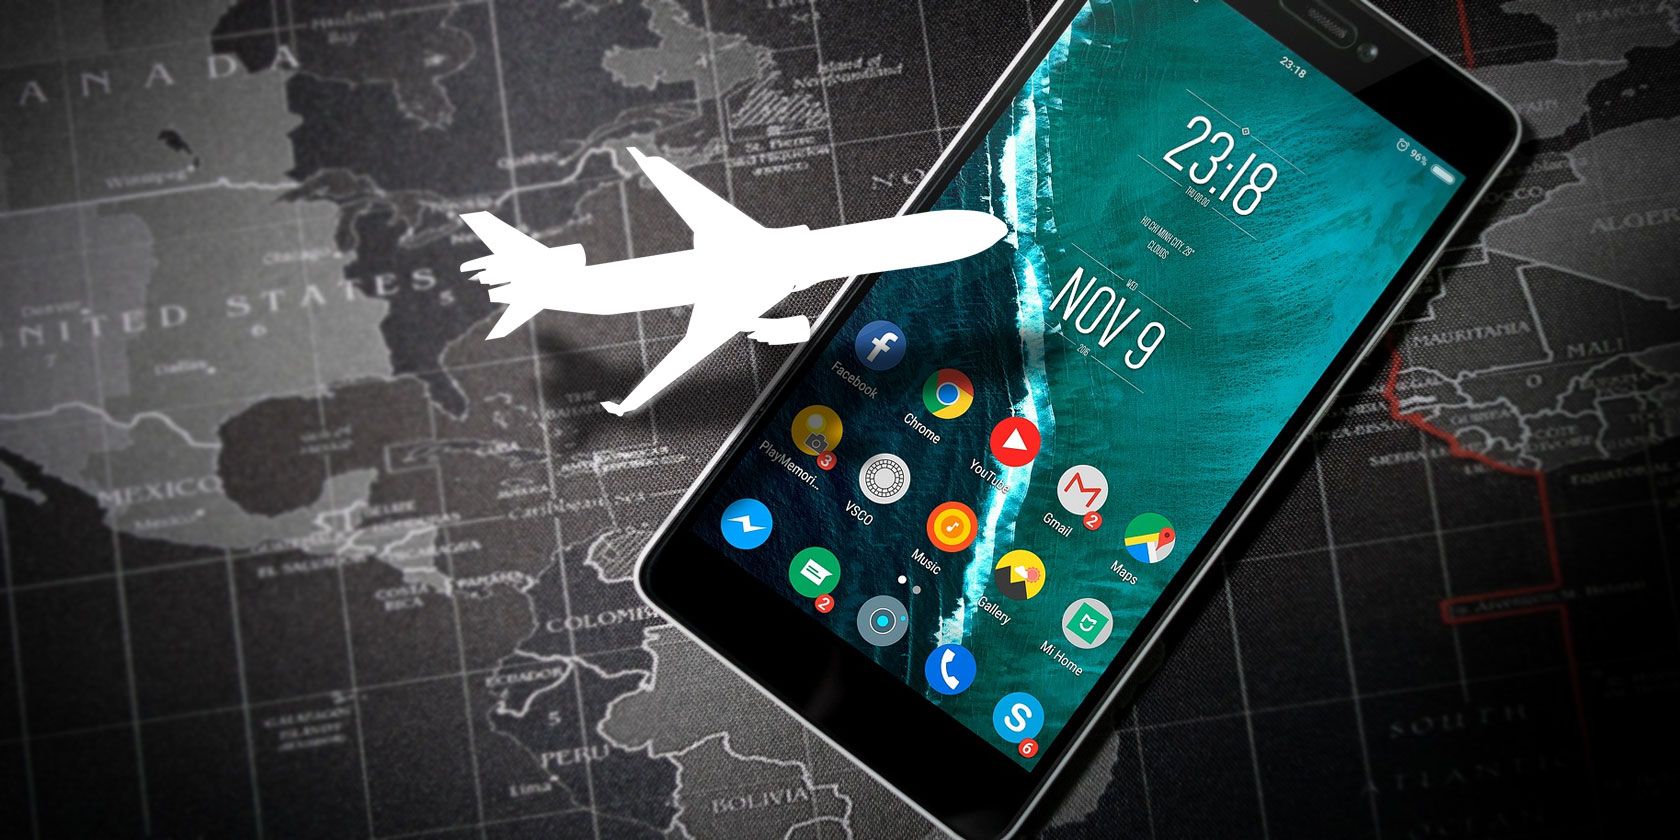 Airplane icon shown over an Android phone, on top of a map